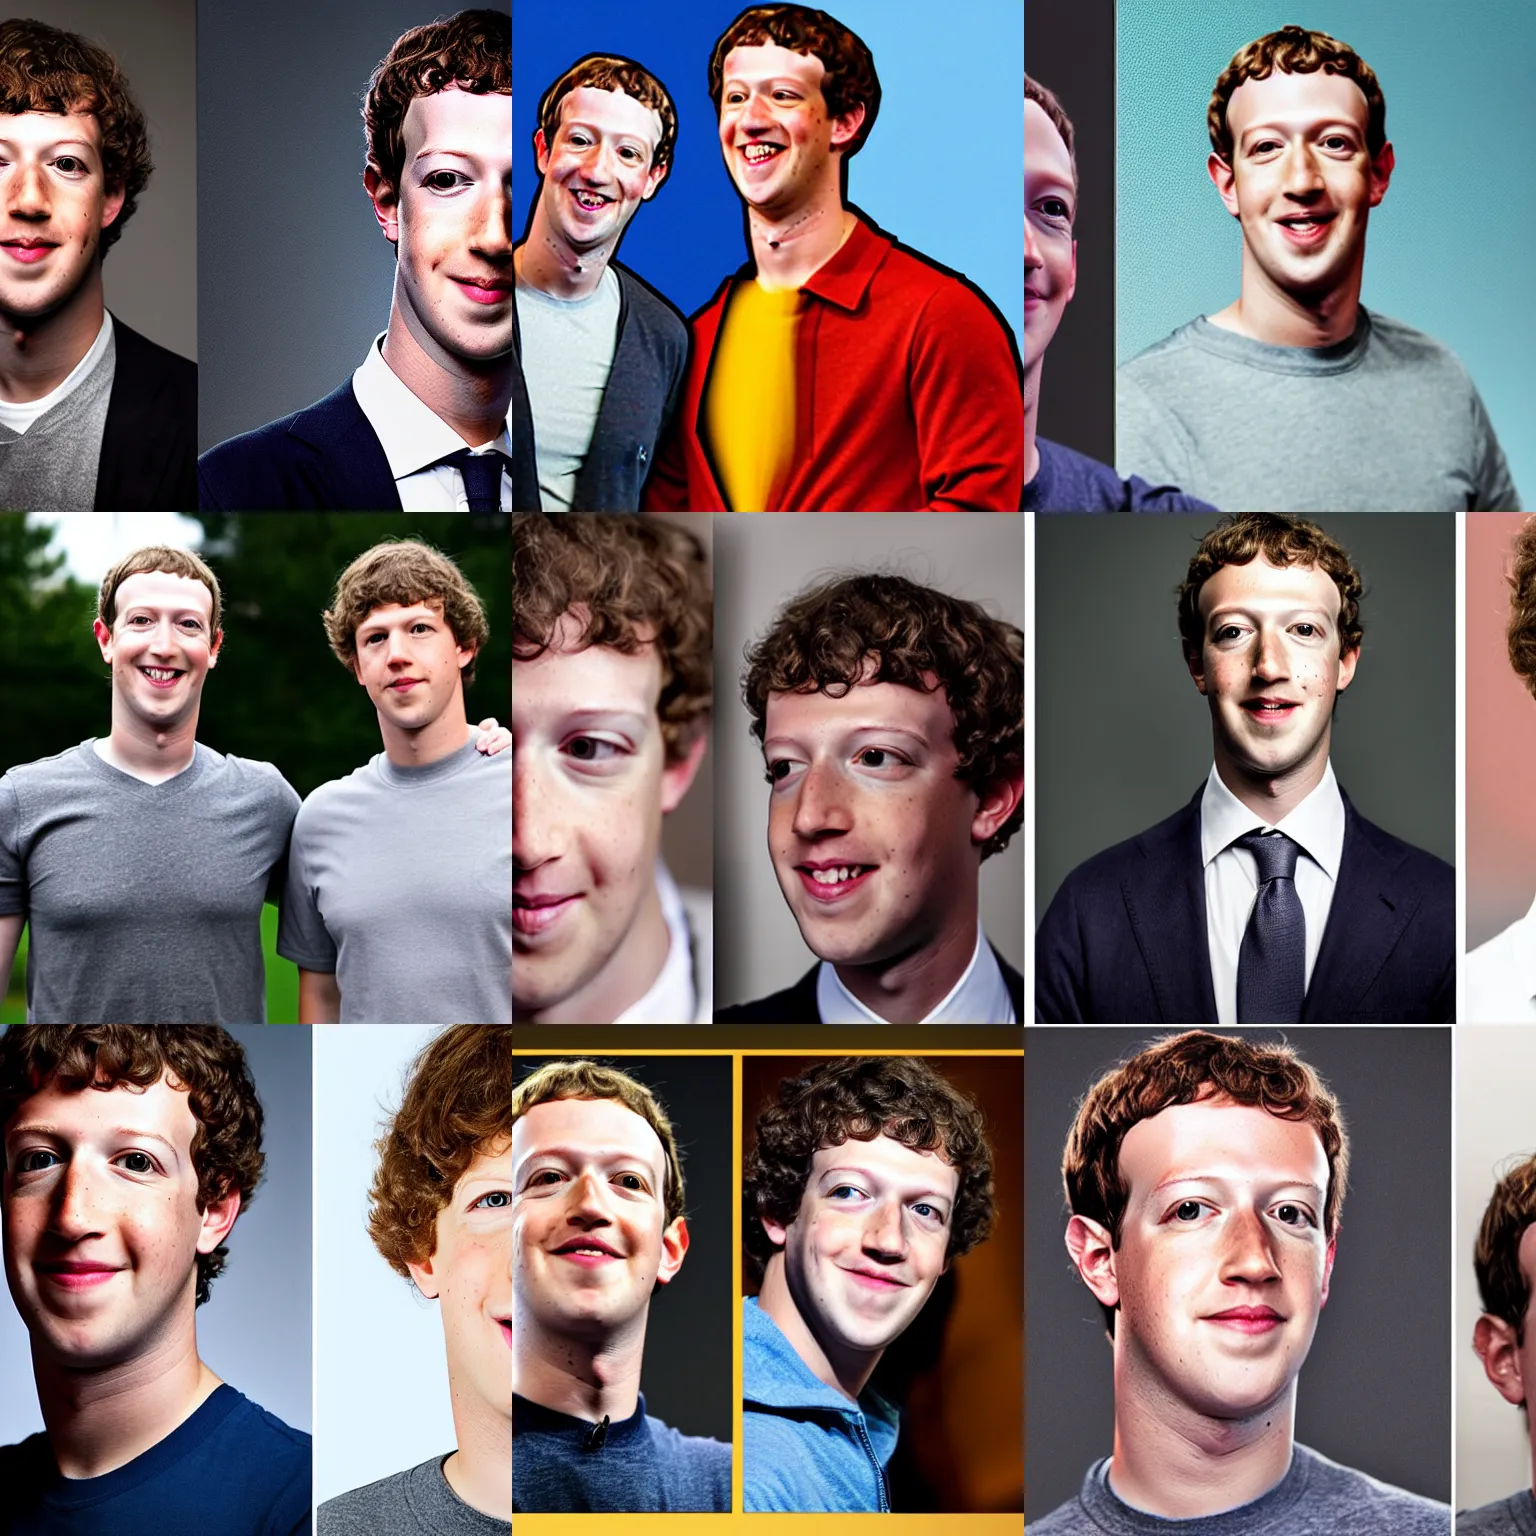 Prompt: A portrait photograph of Mark Zuckerberg with Jesse Eisenberg's face